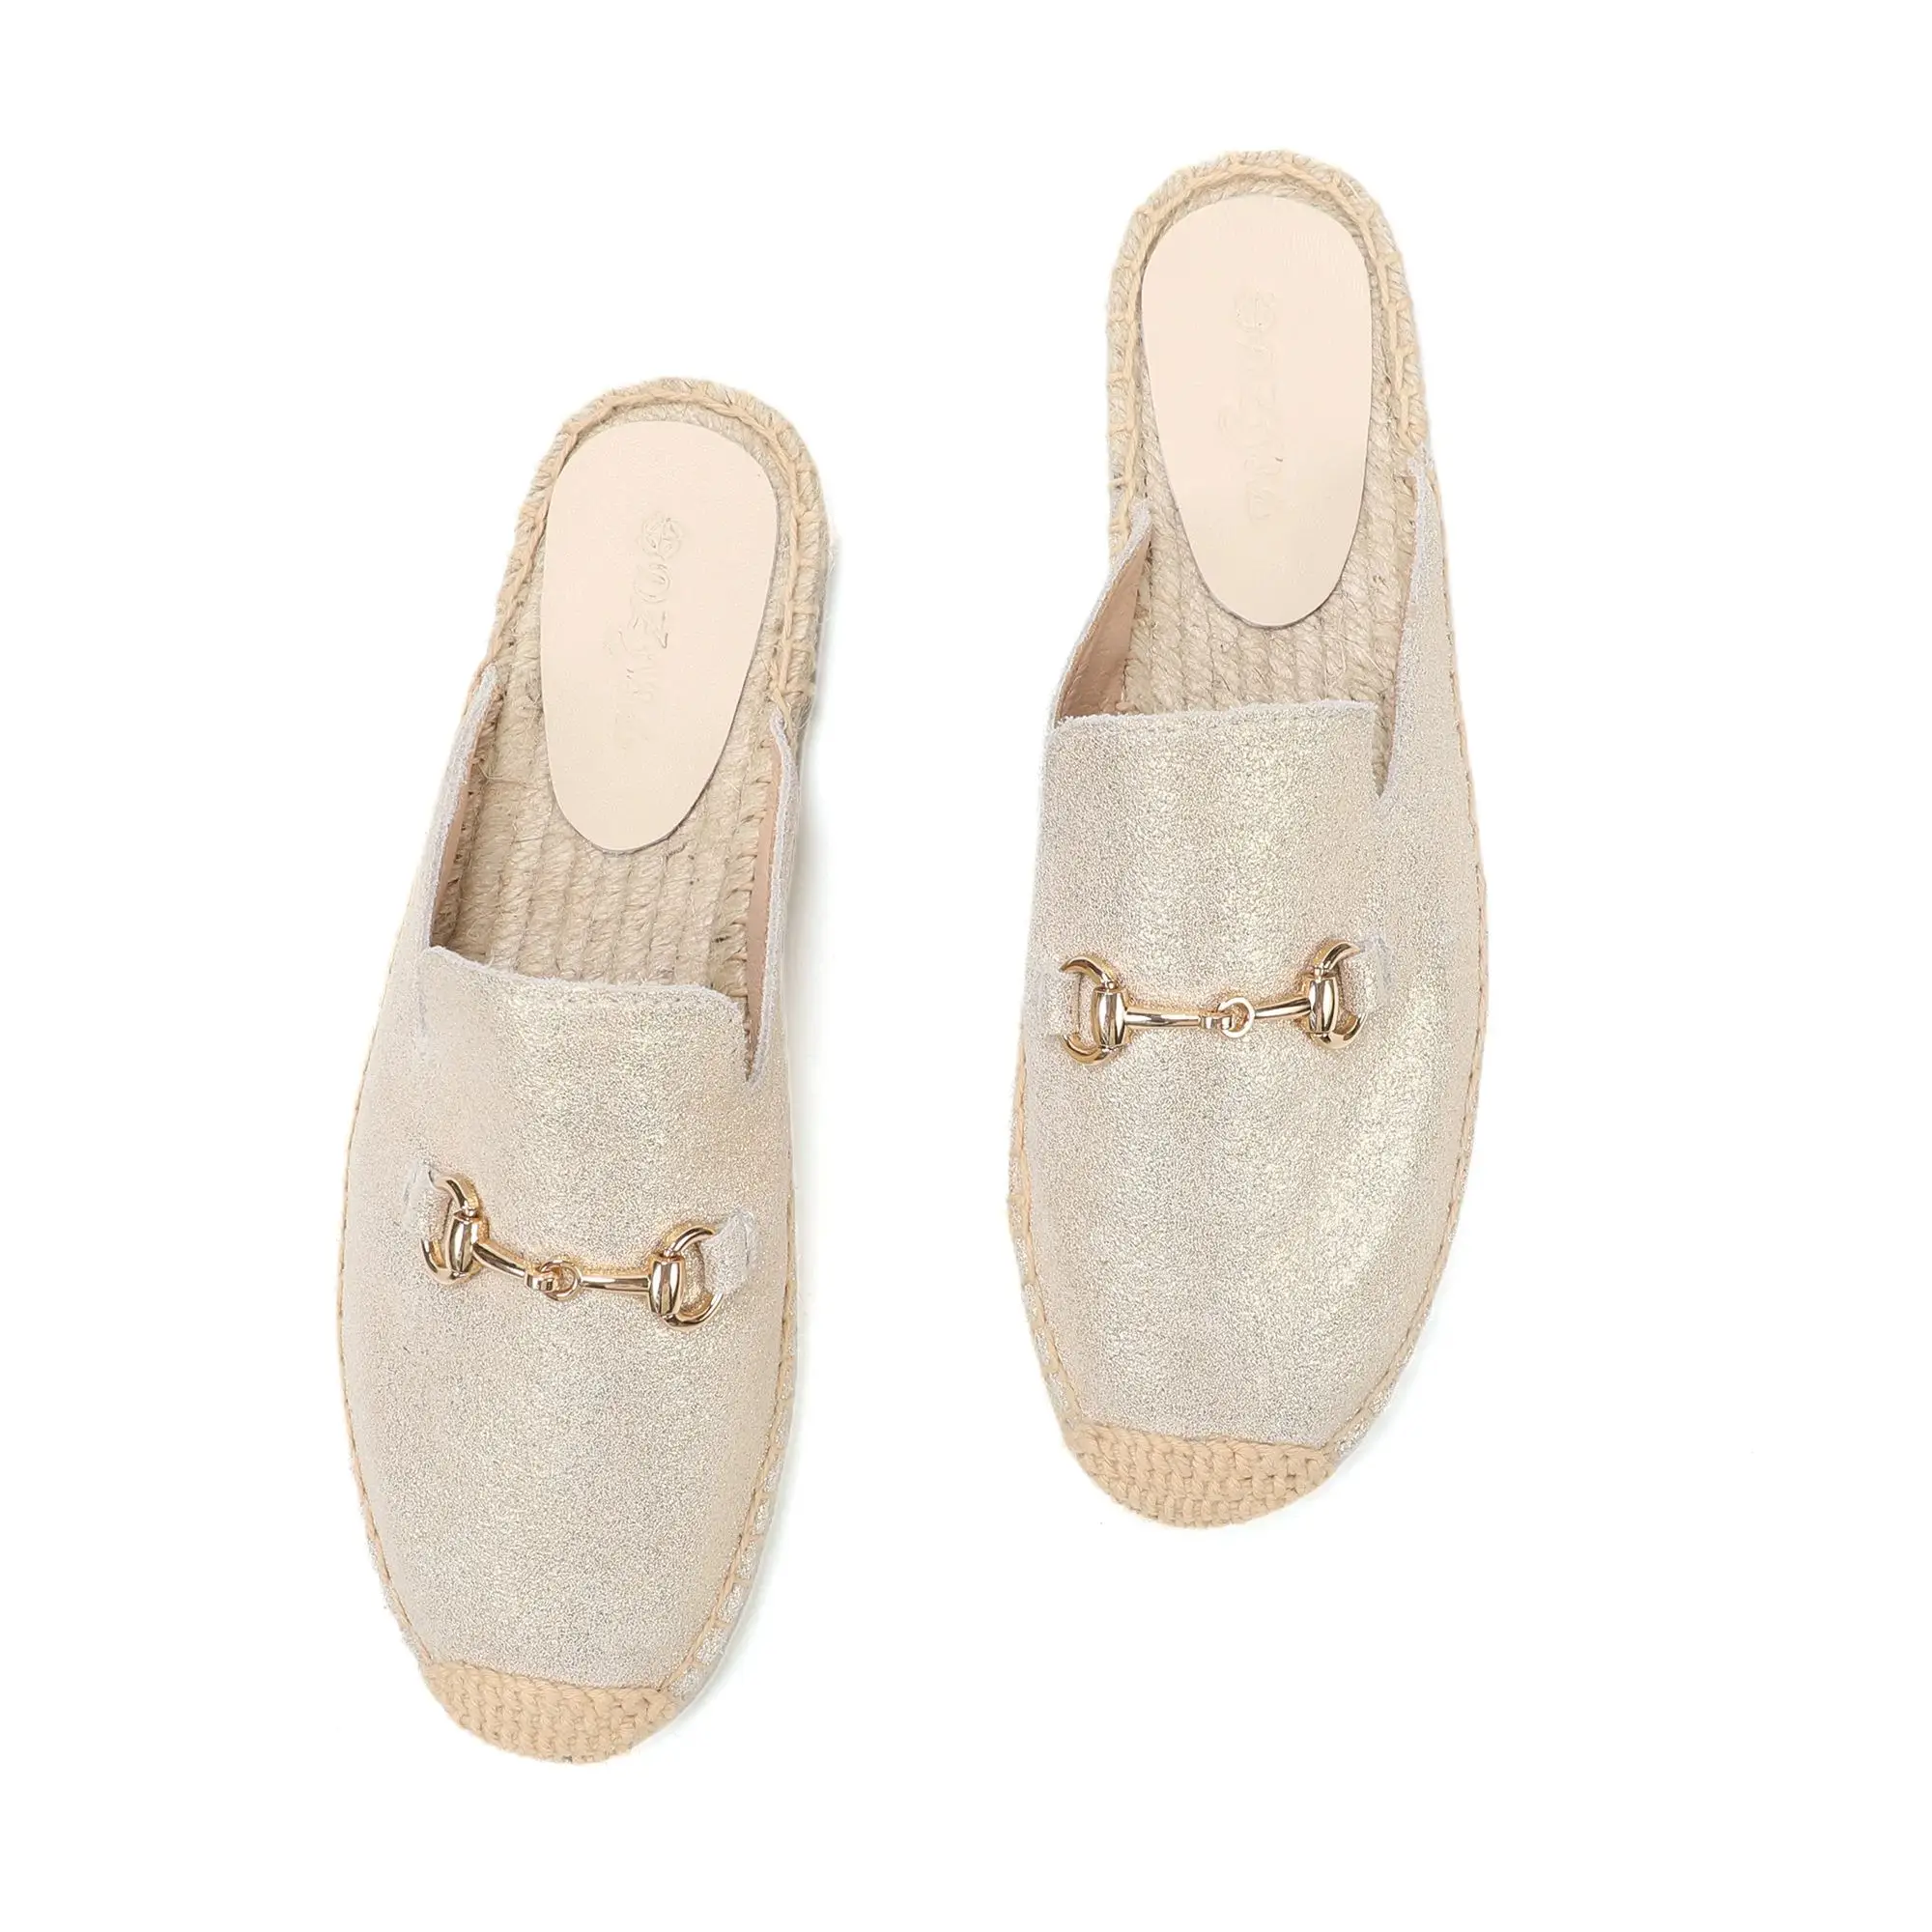 

Comfortable and Stylish Women's Flat Shoes Sandals Espadrilles and Slippers to Elevate Your Summer Look